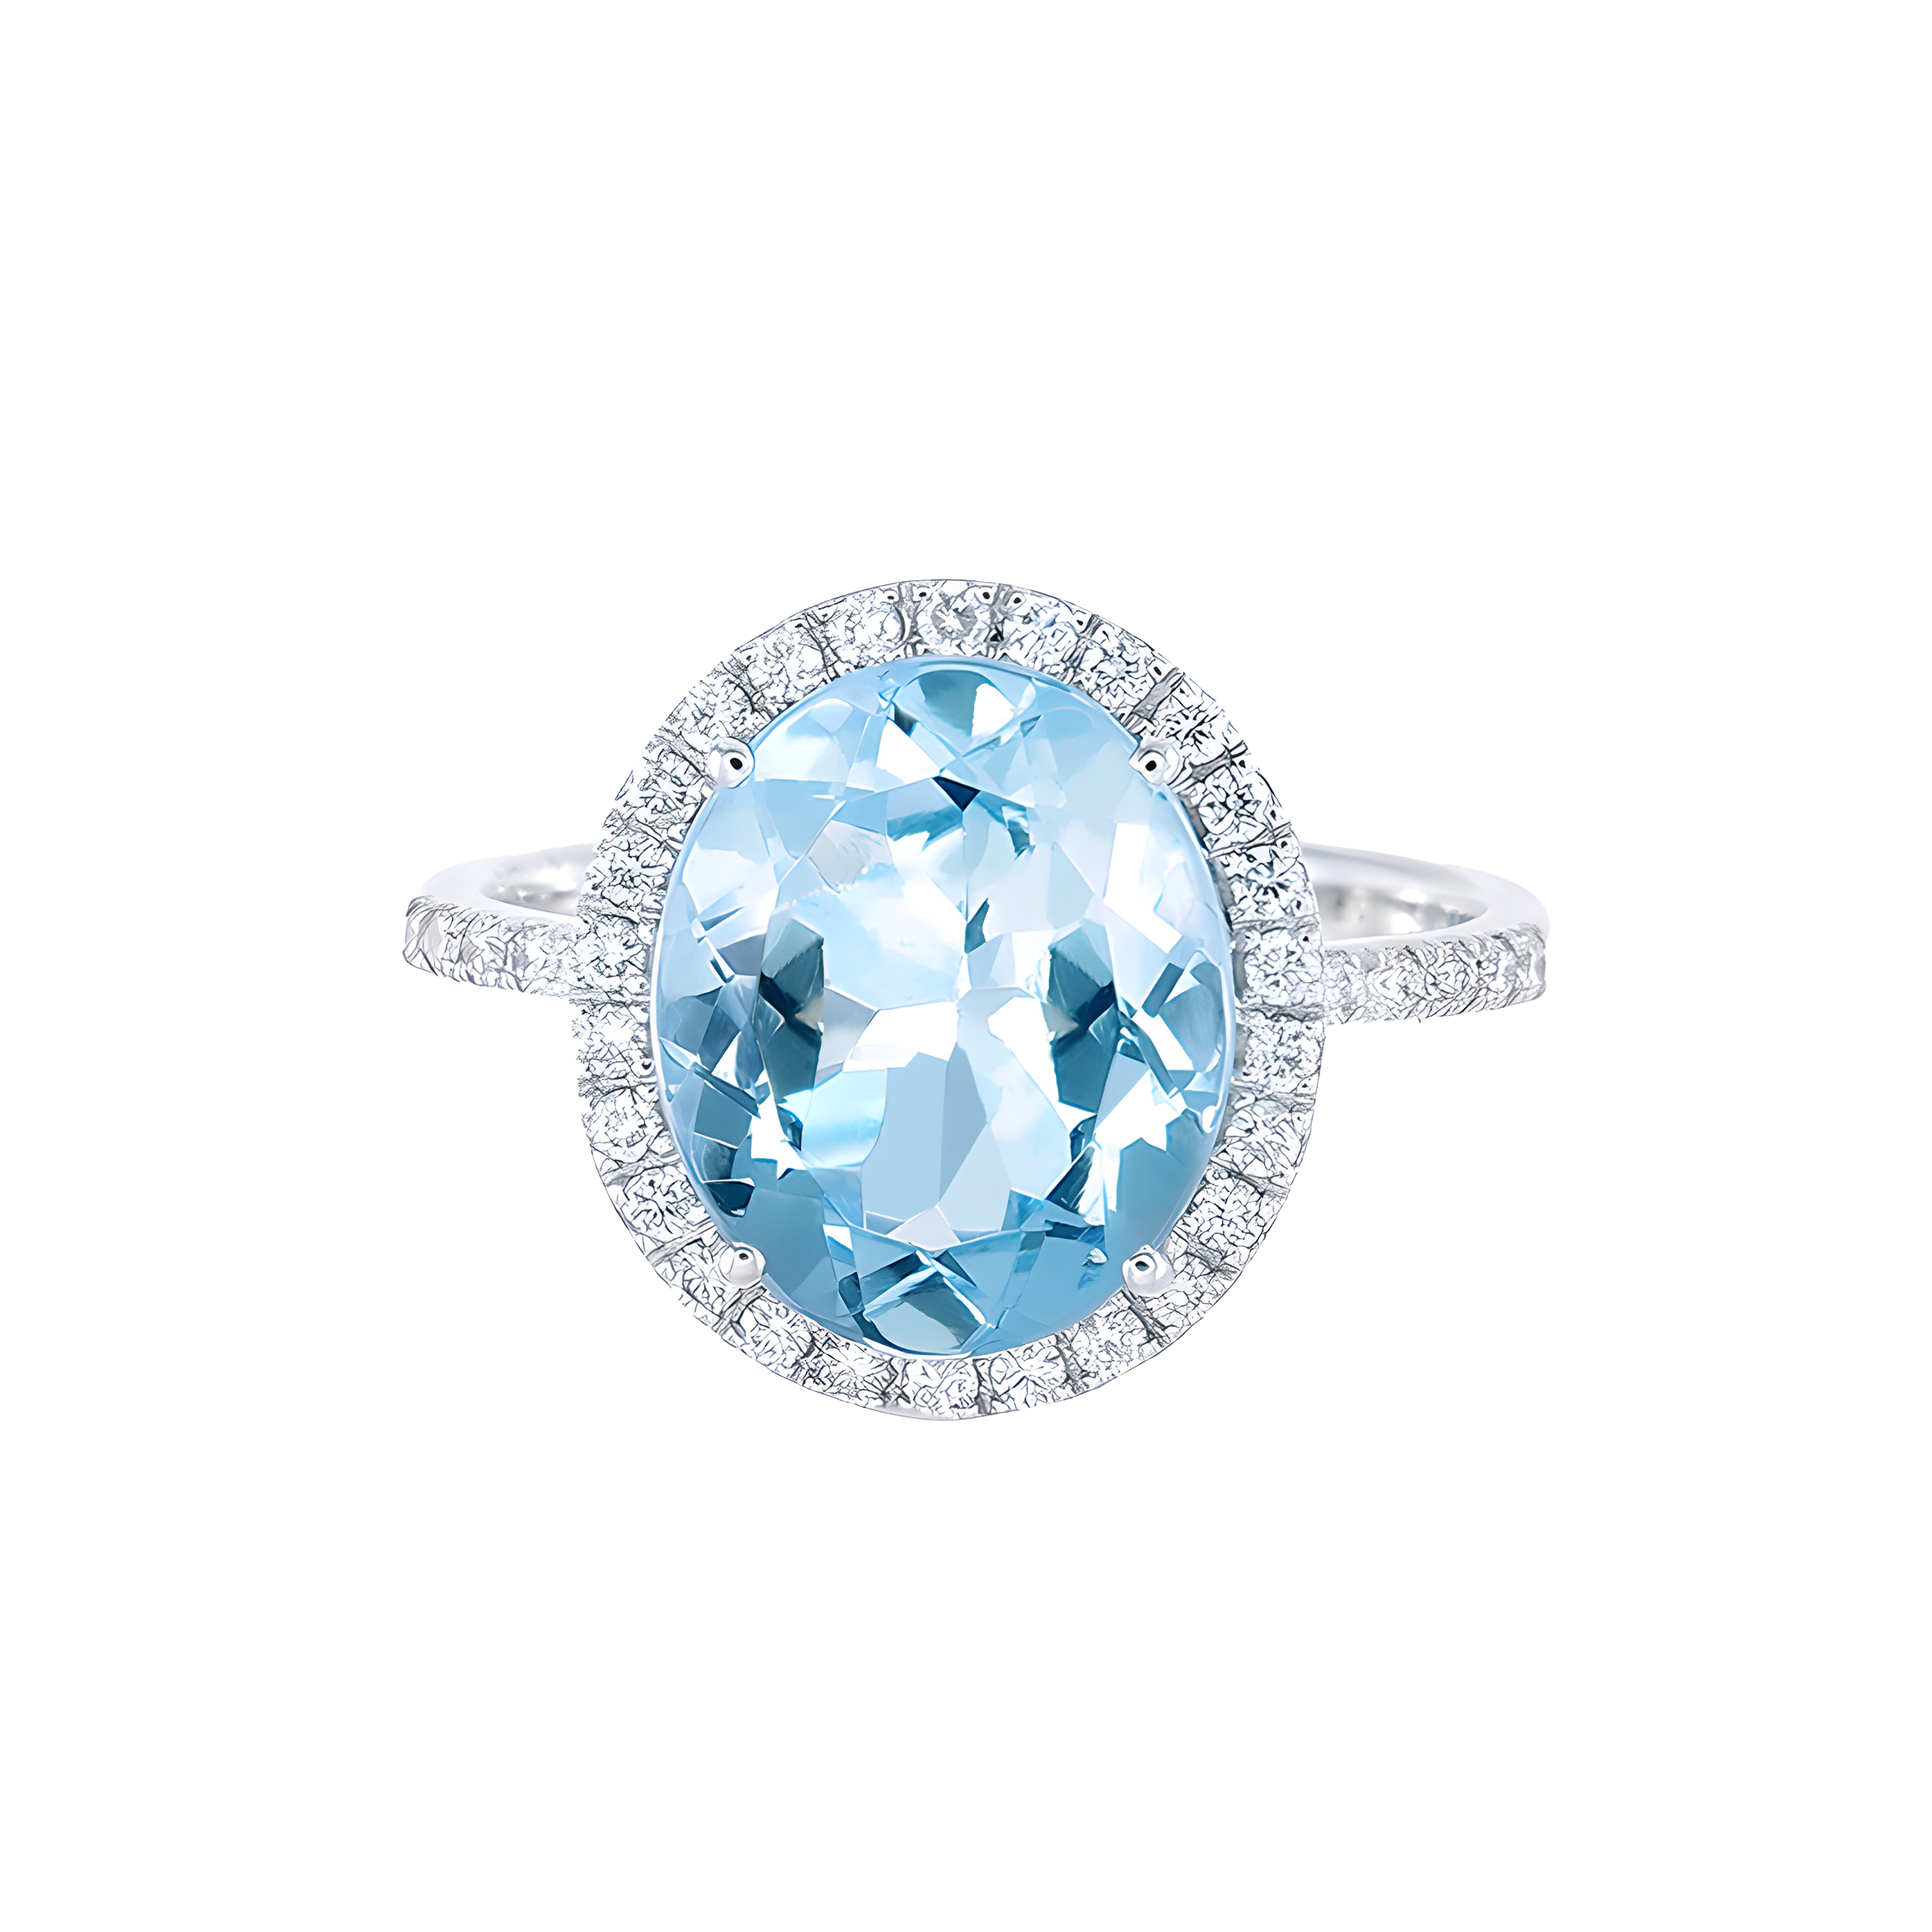 Oval Aquamarine and Diamond Halo Ring in 18k White Gold